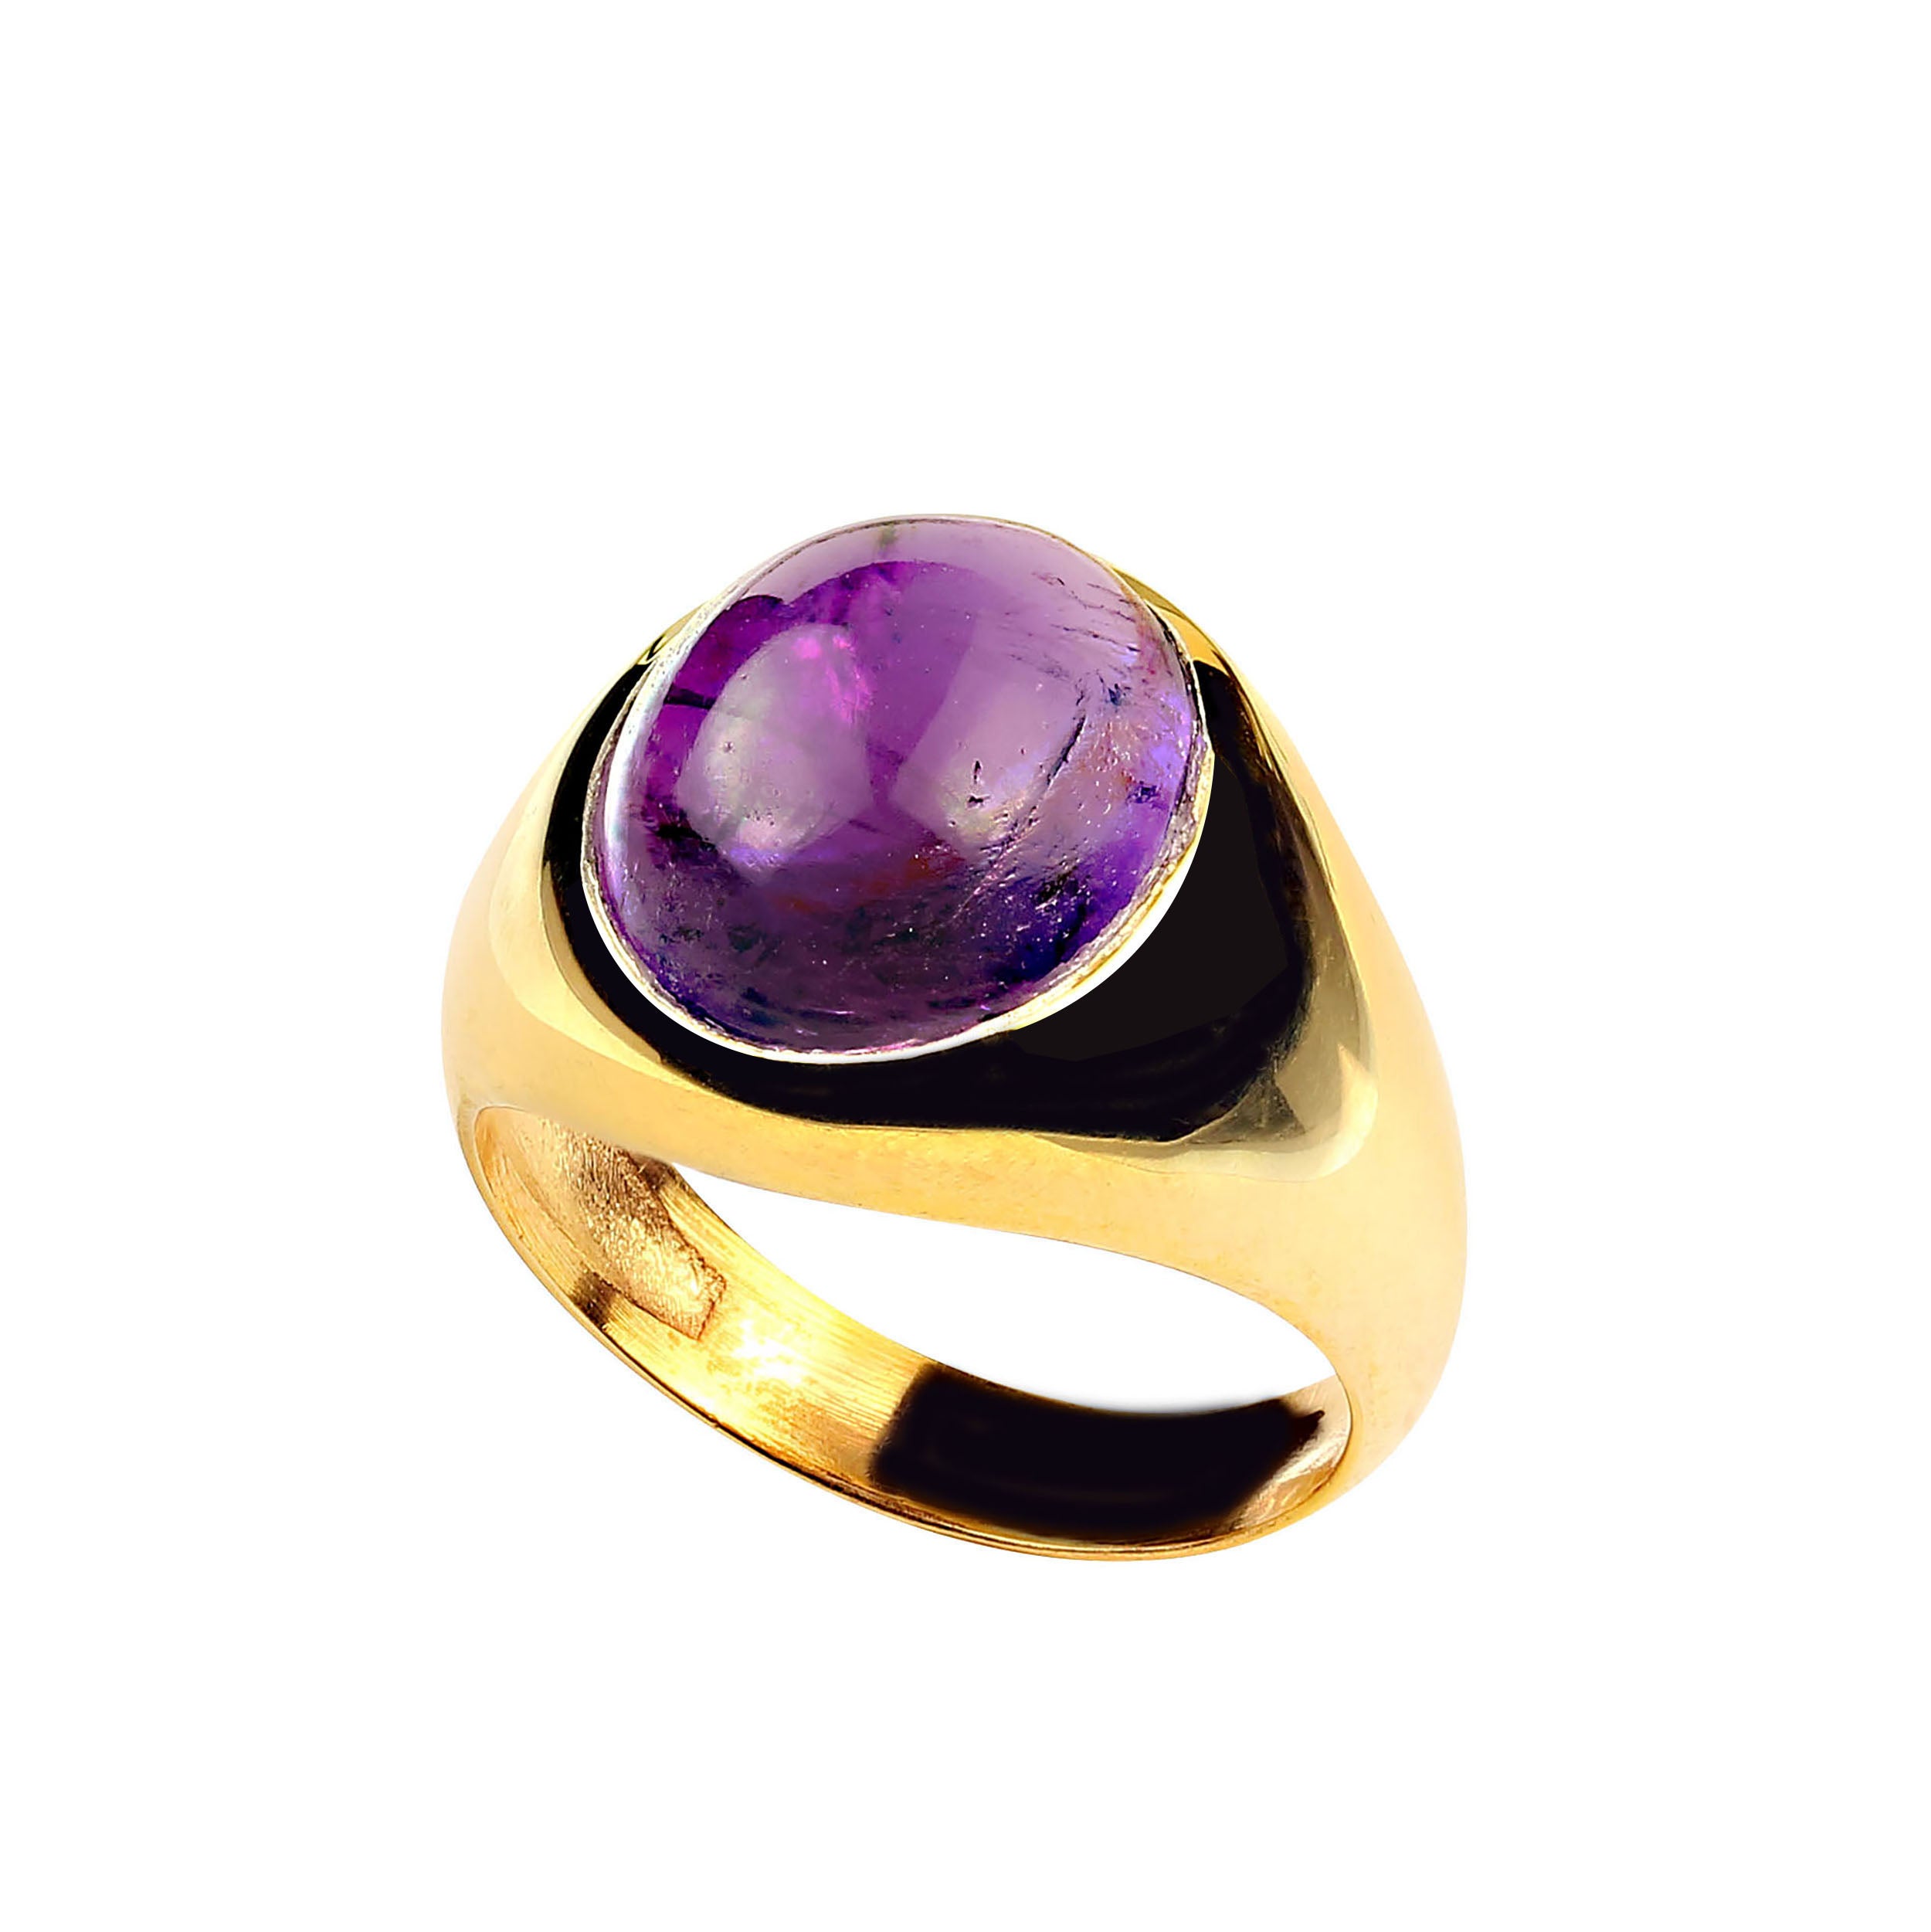 Elegant ring of oval Amethyst cabochon of 8.28ct in a custom bezel setting of gold rhodium over Sterling Silver.  The ring is perfect for daily and on into evening wear. Amethyst is the February birthstone and is said to protect from intoxication